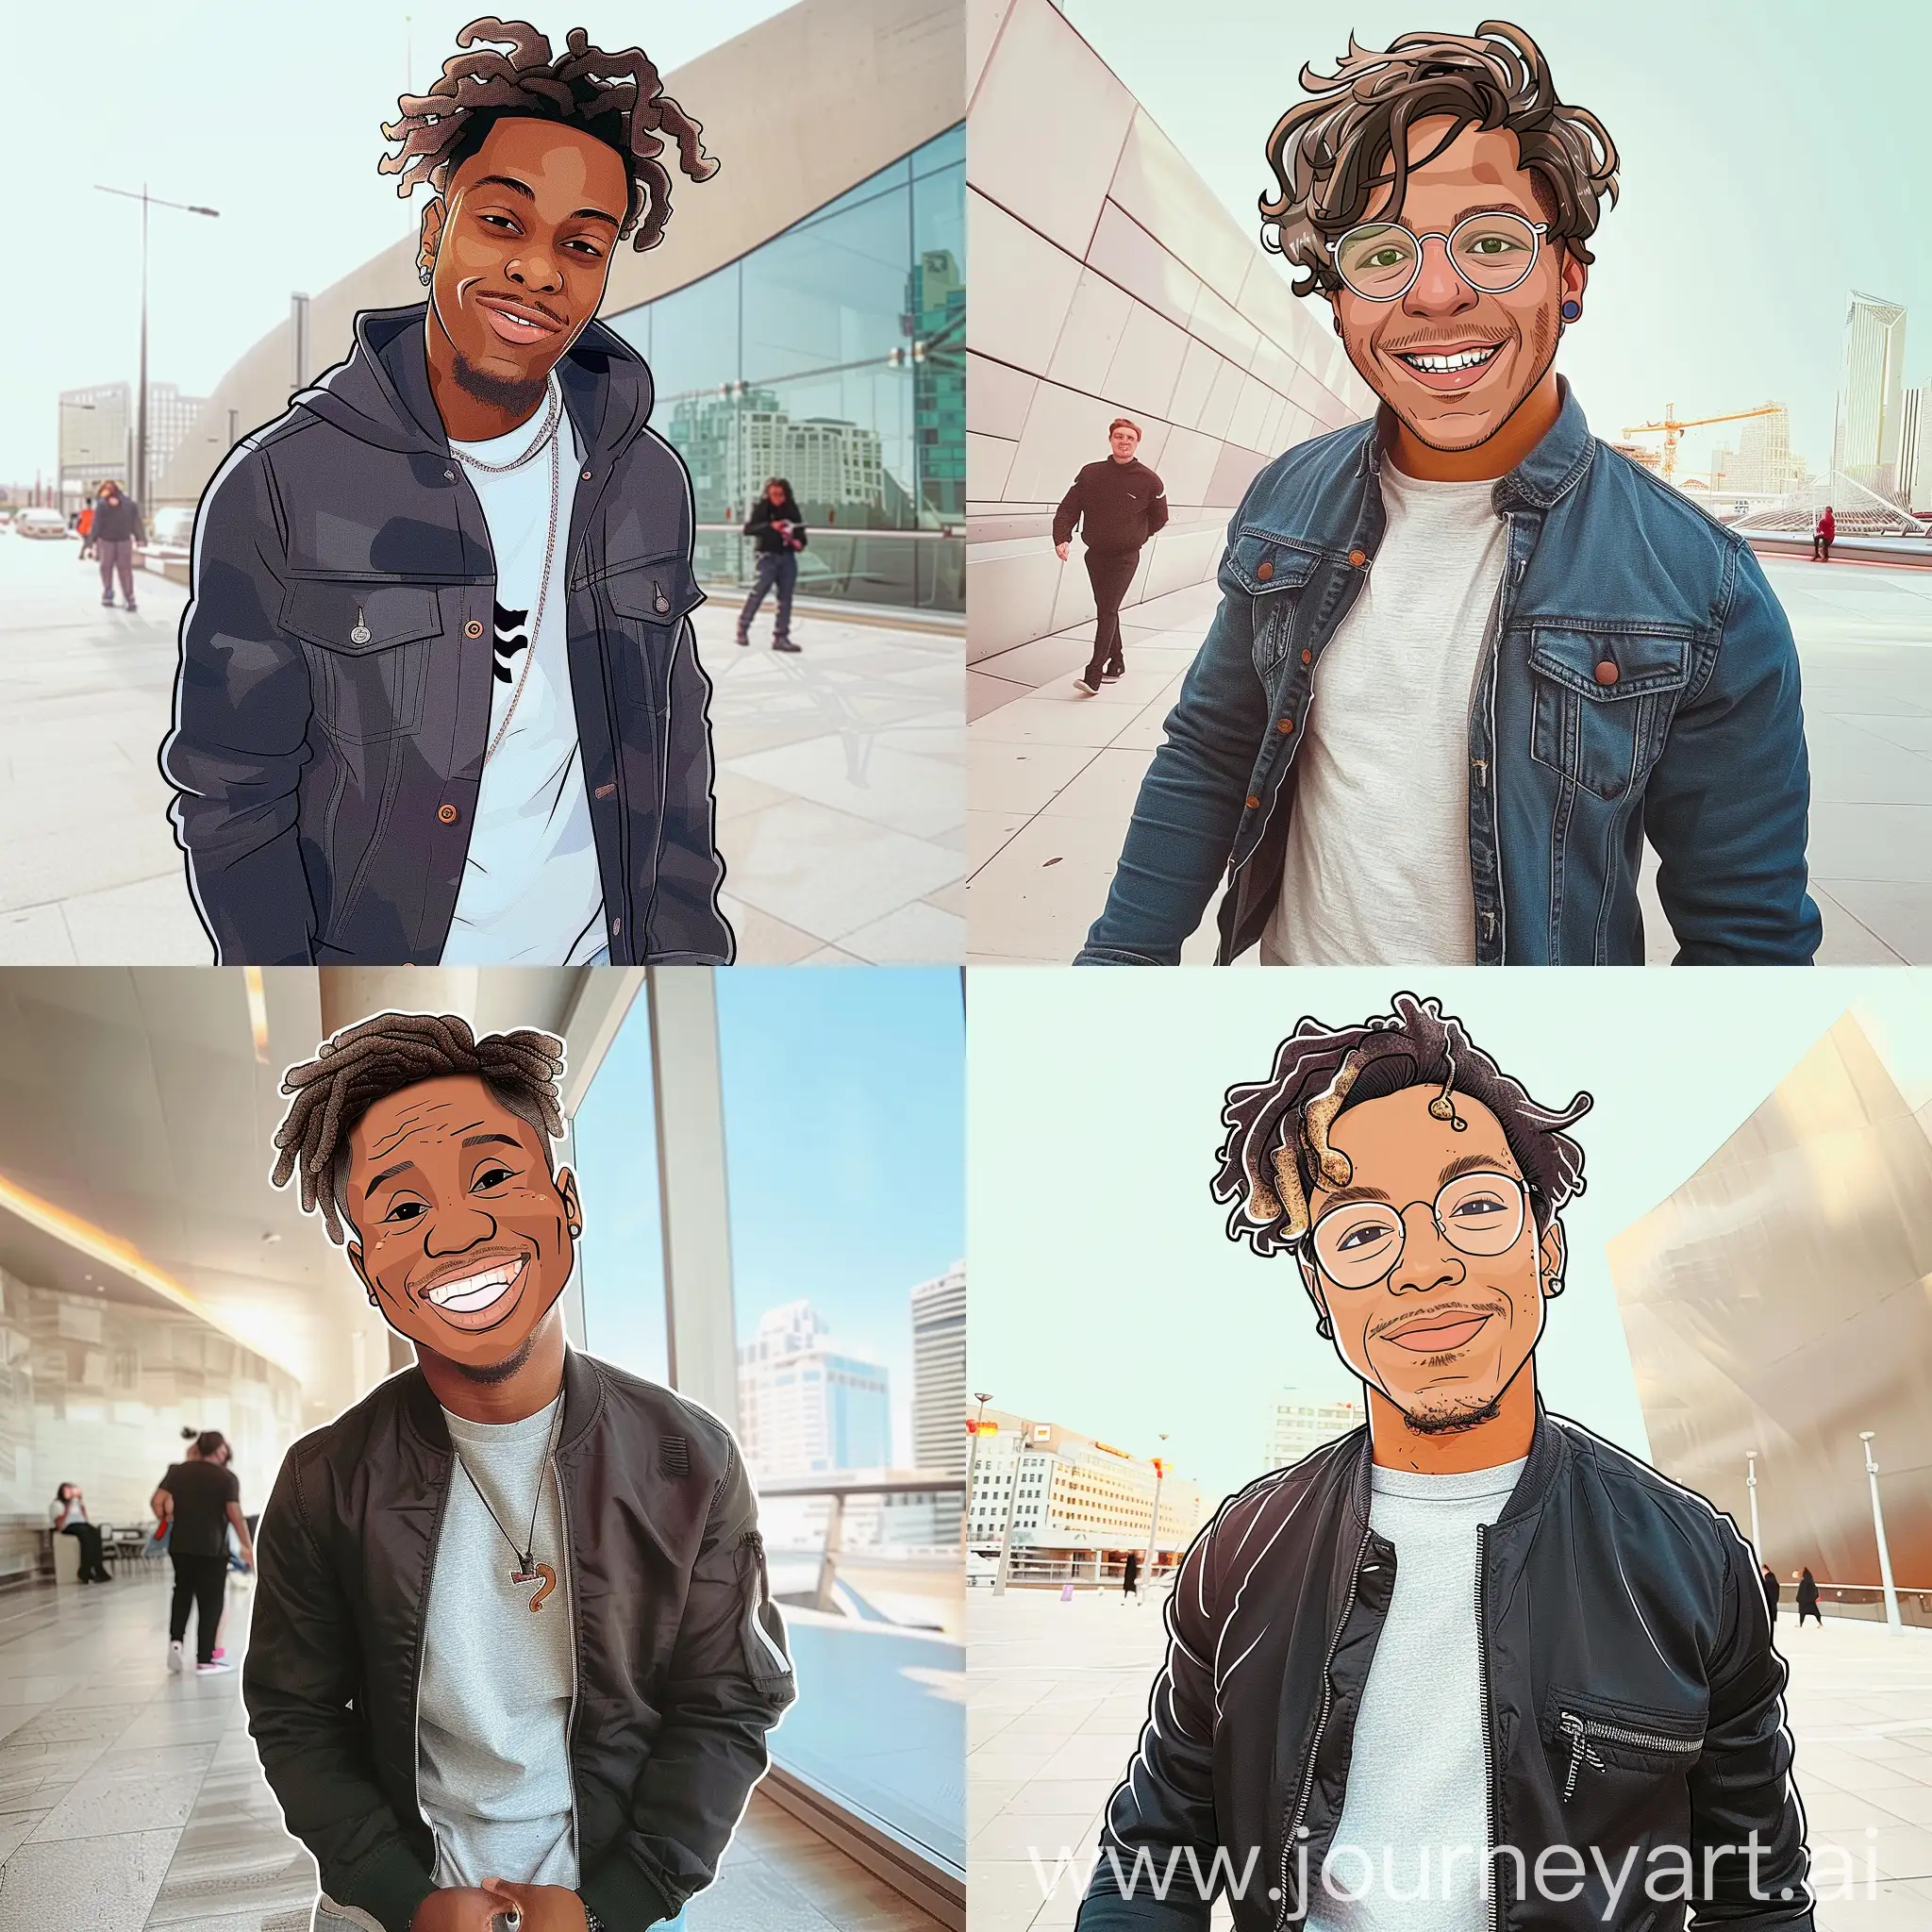 create me  a cartoon version of josiah gillie in the picture 
